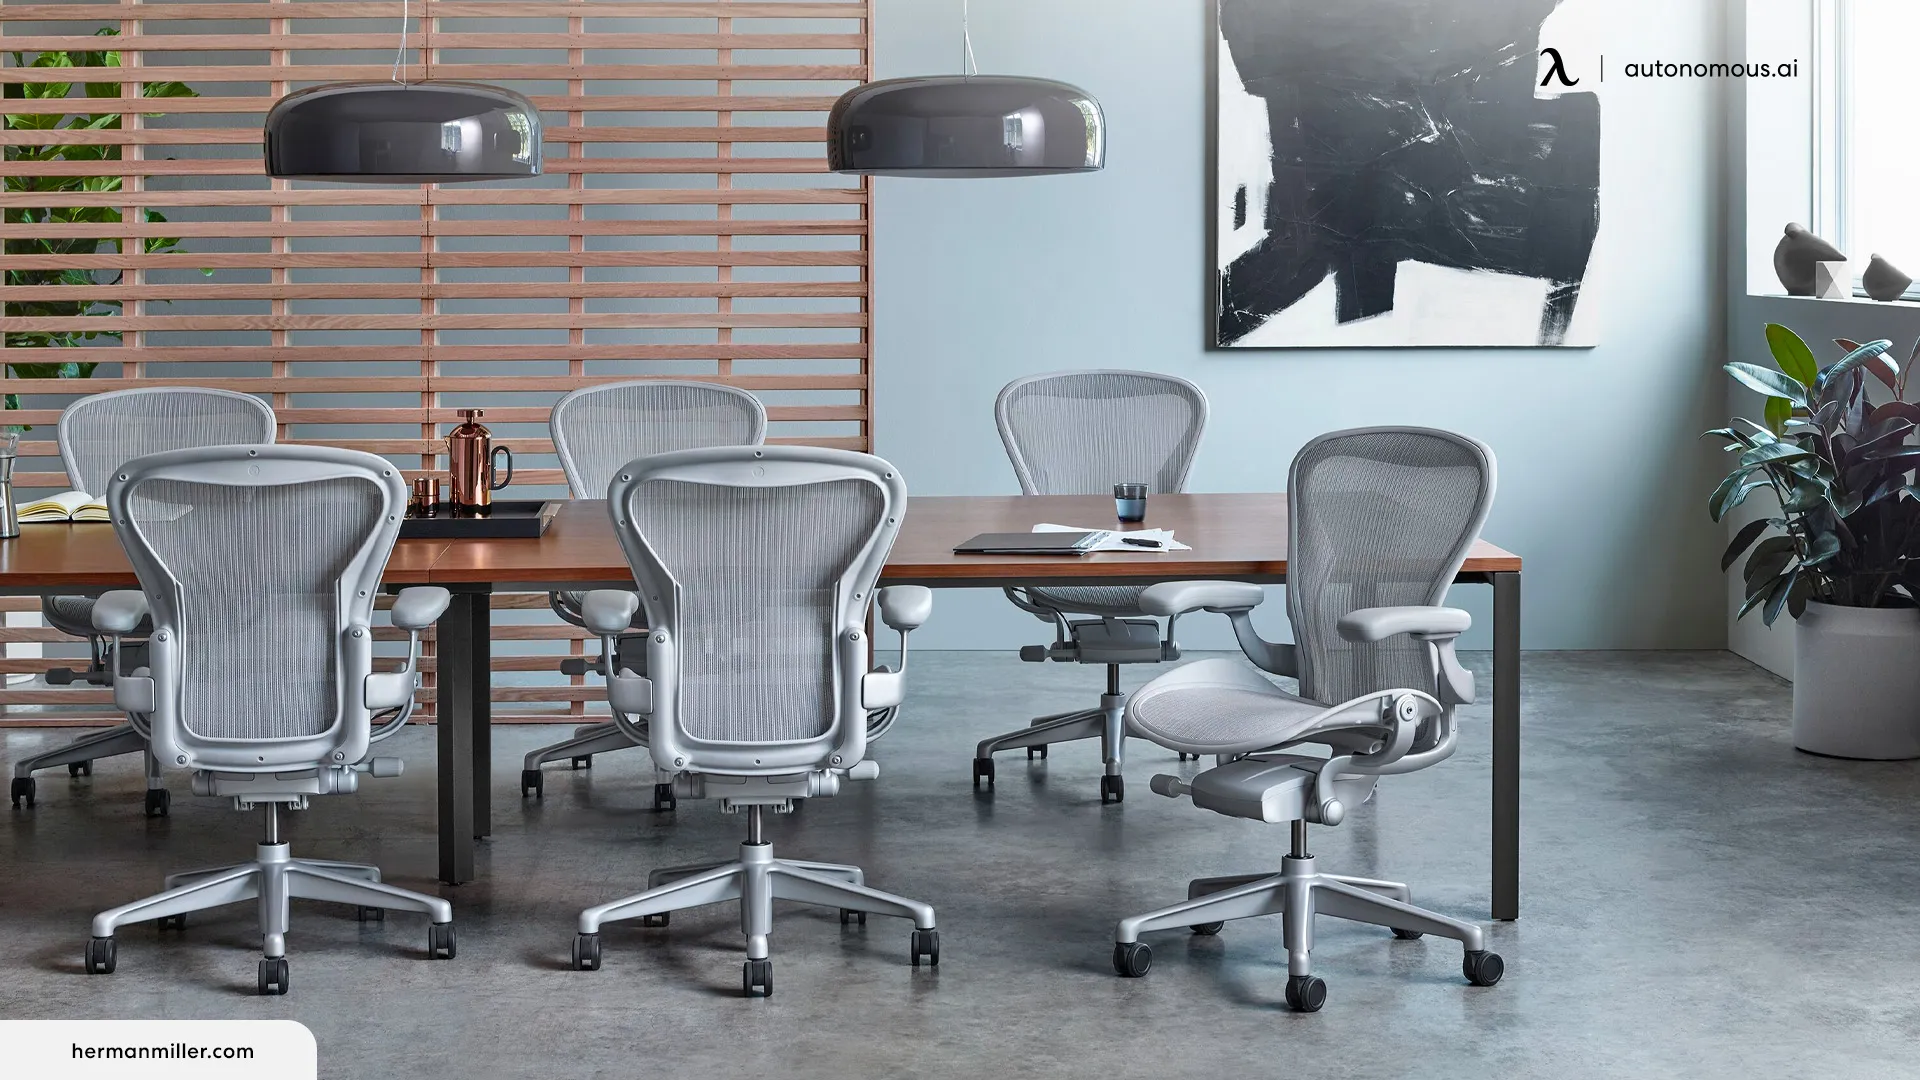 Aeron chair has a mesh back which supports extra ventilation and breathability